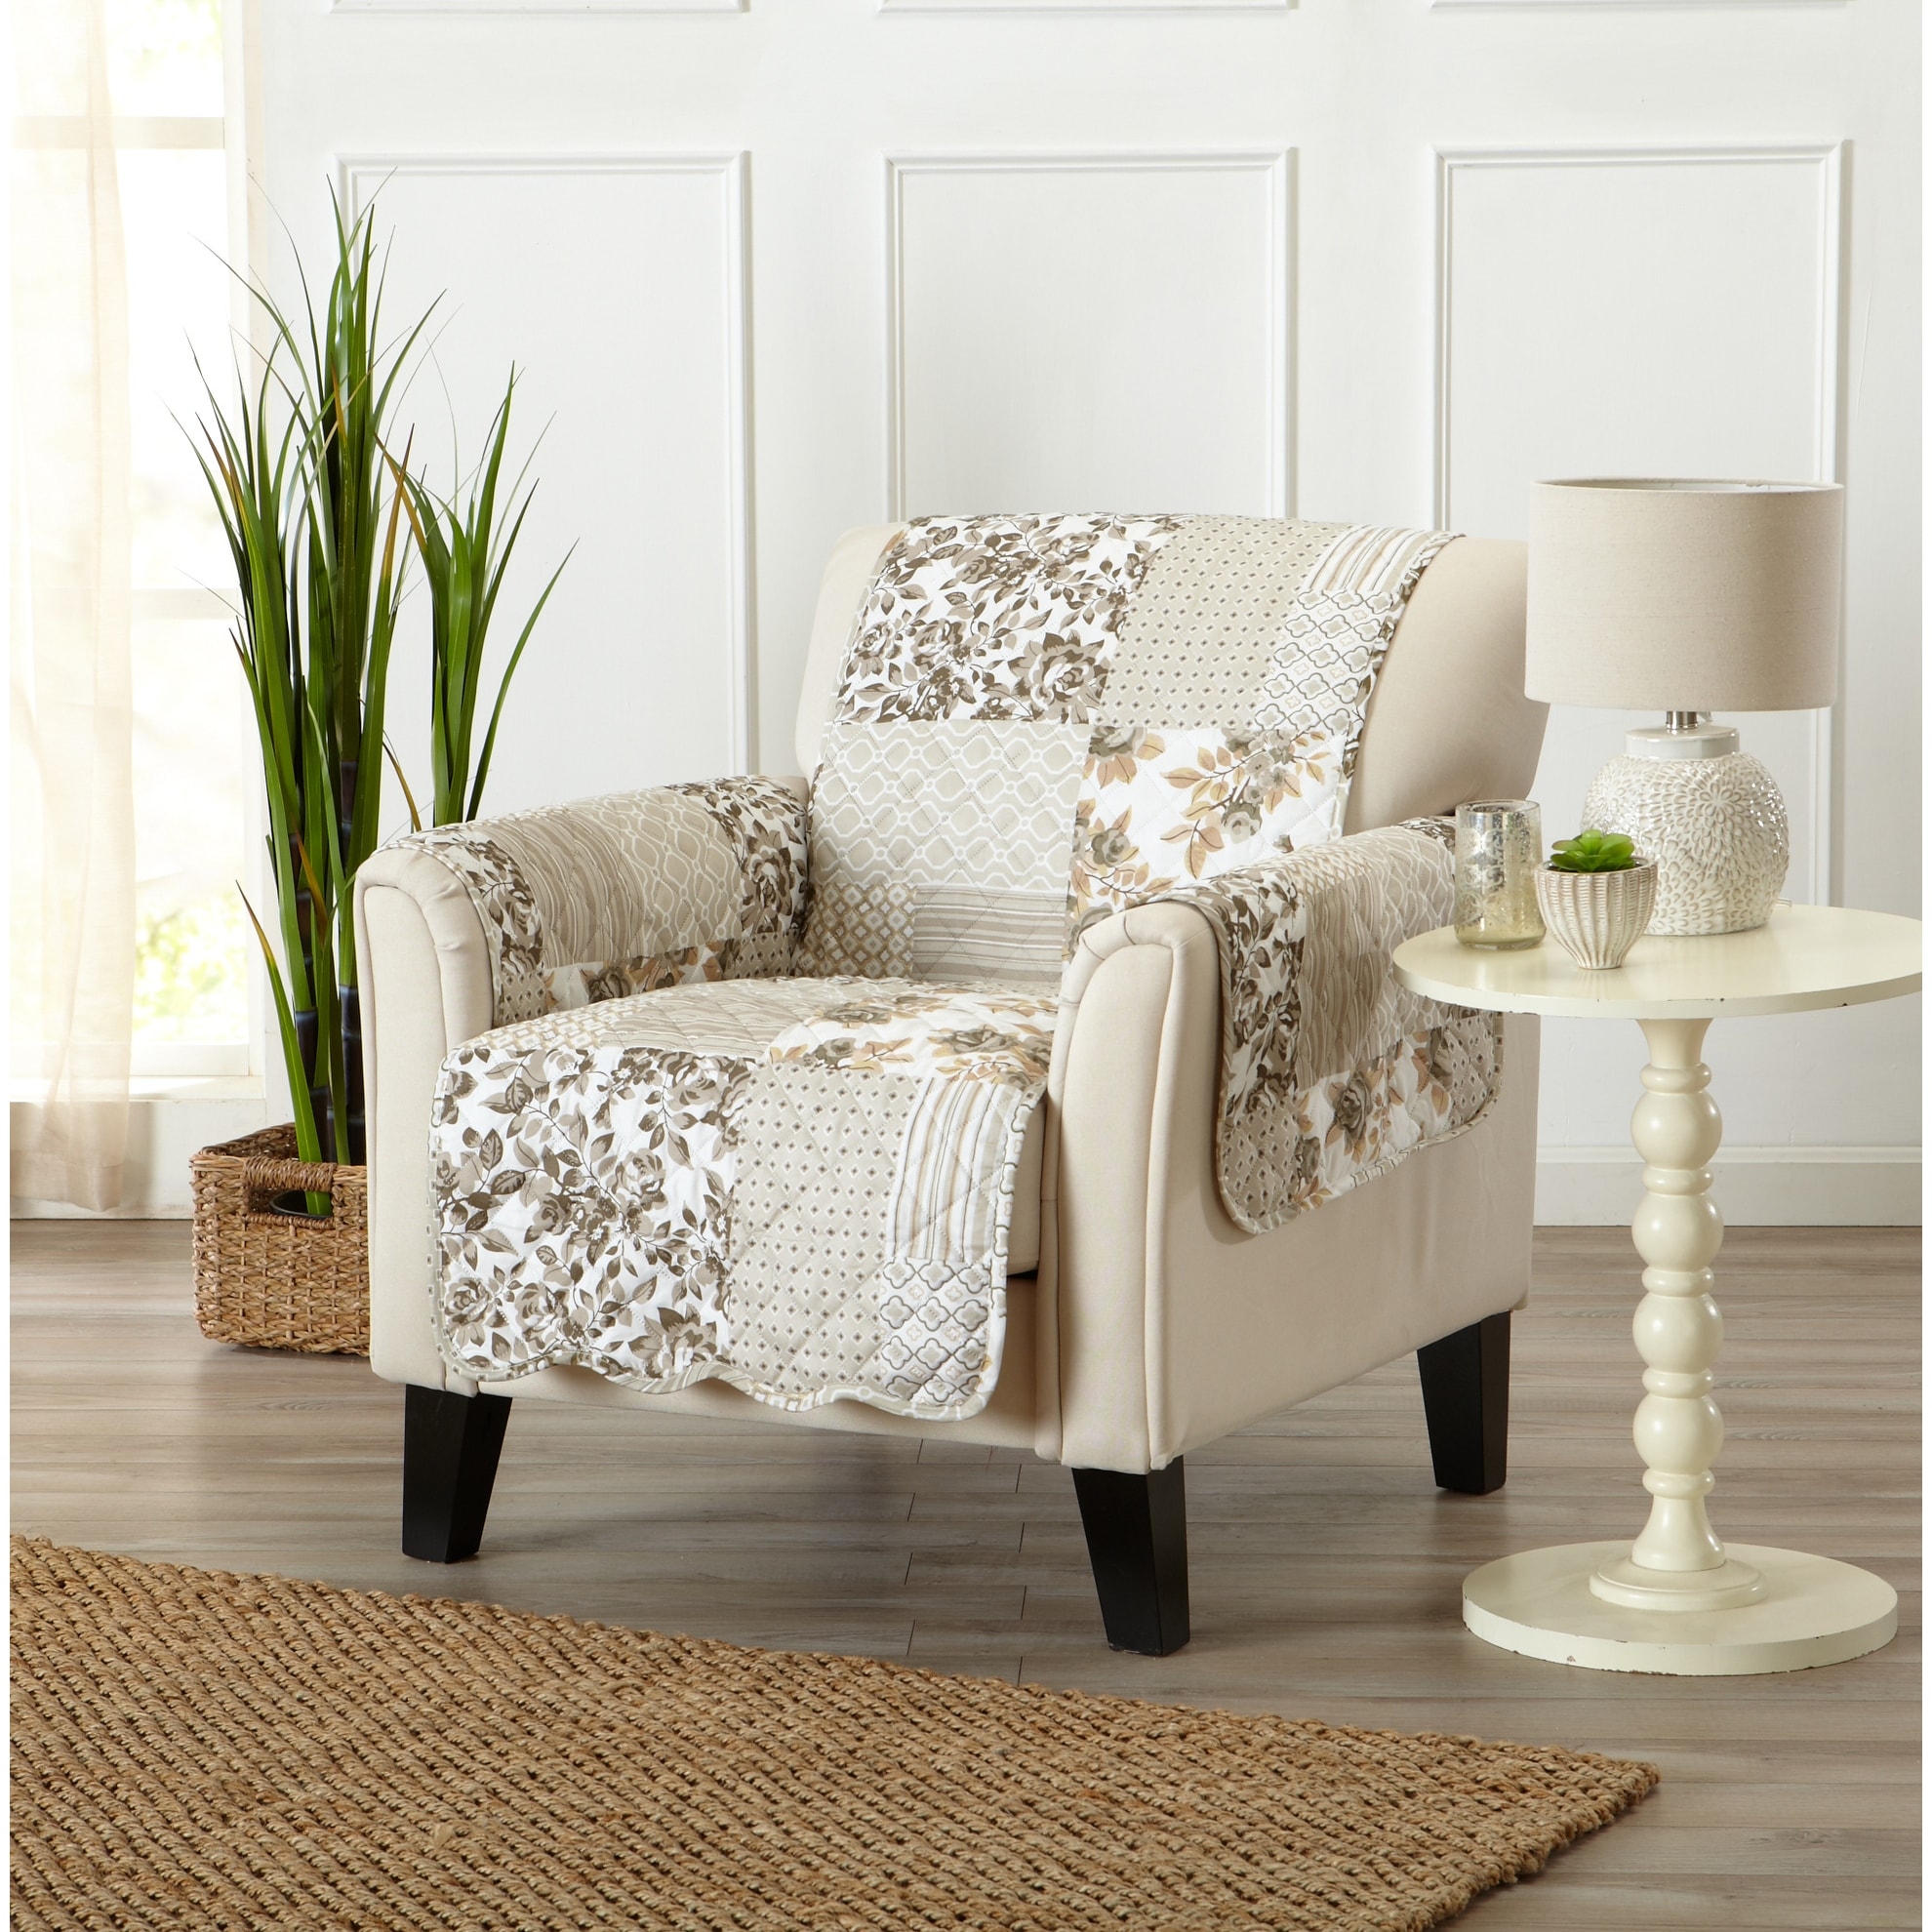 https://ak1.ostkcdn.com/images/products/is/images/direct/6baf3bd4cdf0d43f7d79079c64e0389c71f61add/Great-Bay-Home-Patchwork-Scalloped-Stain-Resistant-Printed-Chair-Protector.jpg